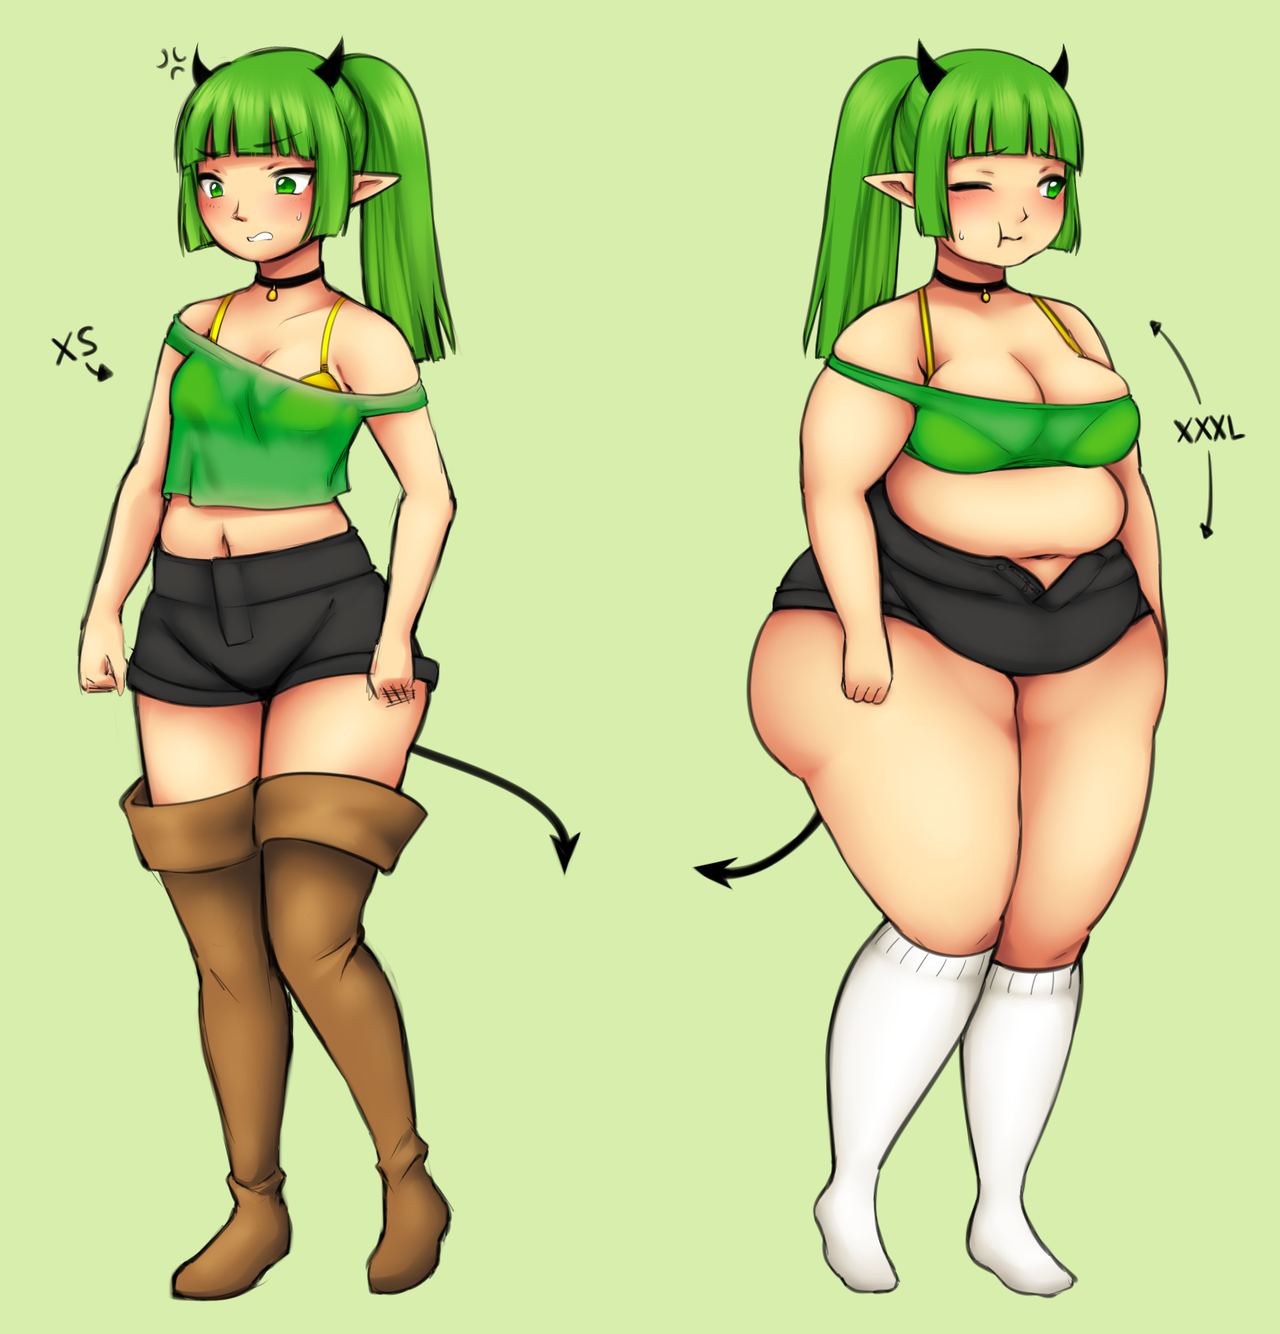 Envy Weight Gain Sequence by Cakehoarder on DeviantArt.